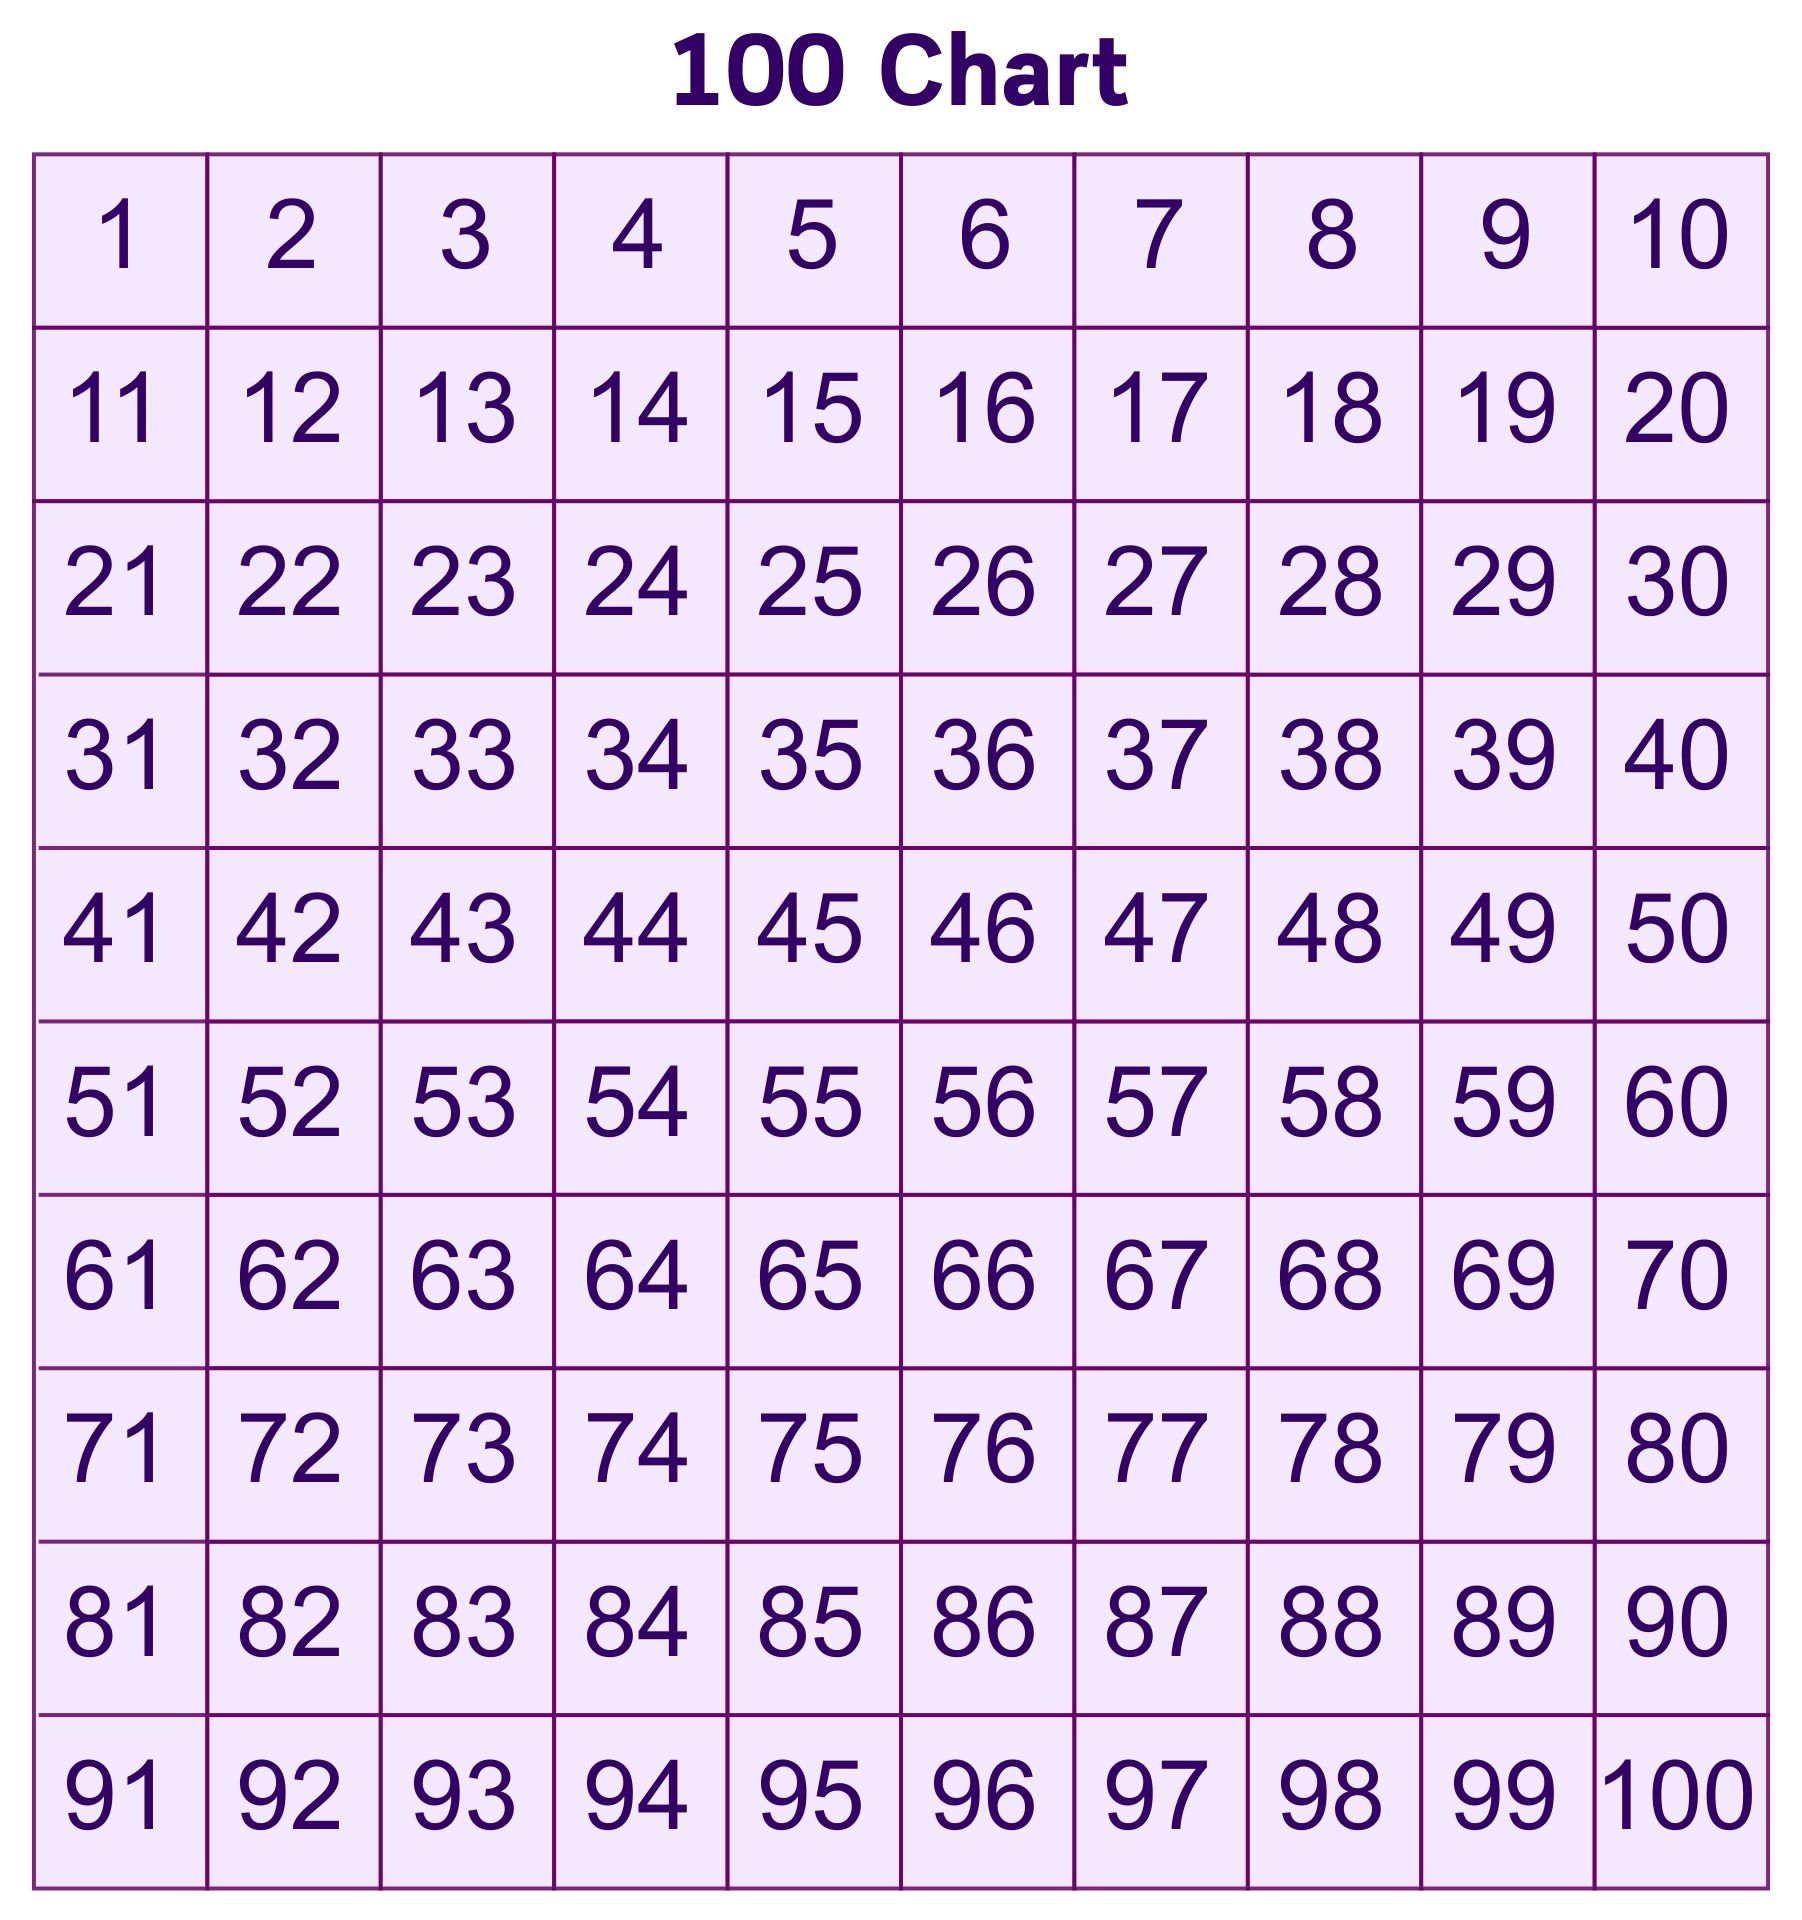 number-chart-1-100-1st-grade-math-charts-1-100-the-layout-allows